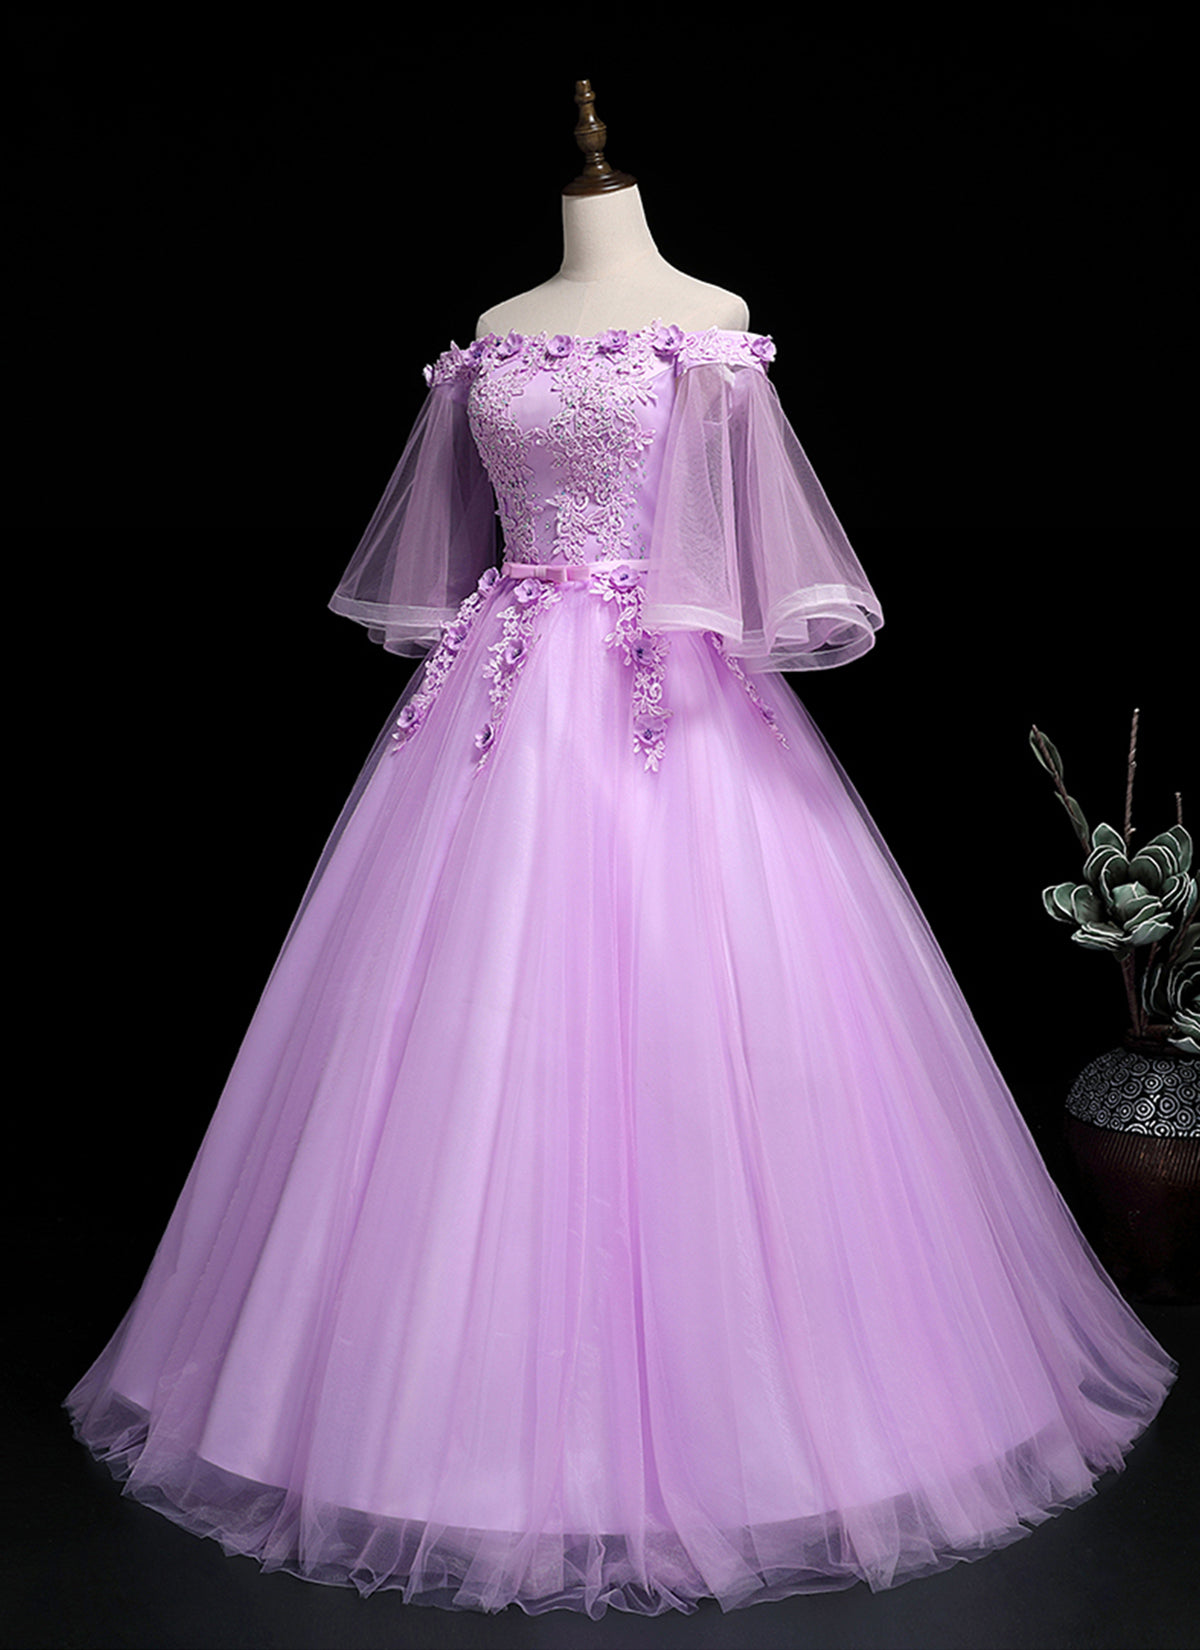 Lavender Off Shoulder Lavender Evening Gown With Lace Appliques Perfect For  Quinceanera, Sweet 16, Formal Events, Birthdays, And Princess Parties From  Zaomeng321, $235.78 | DHgate.Com